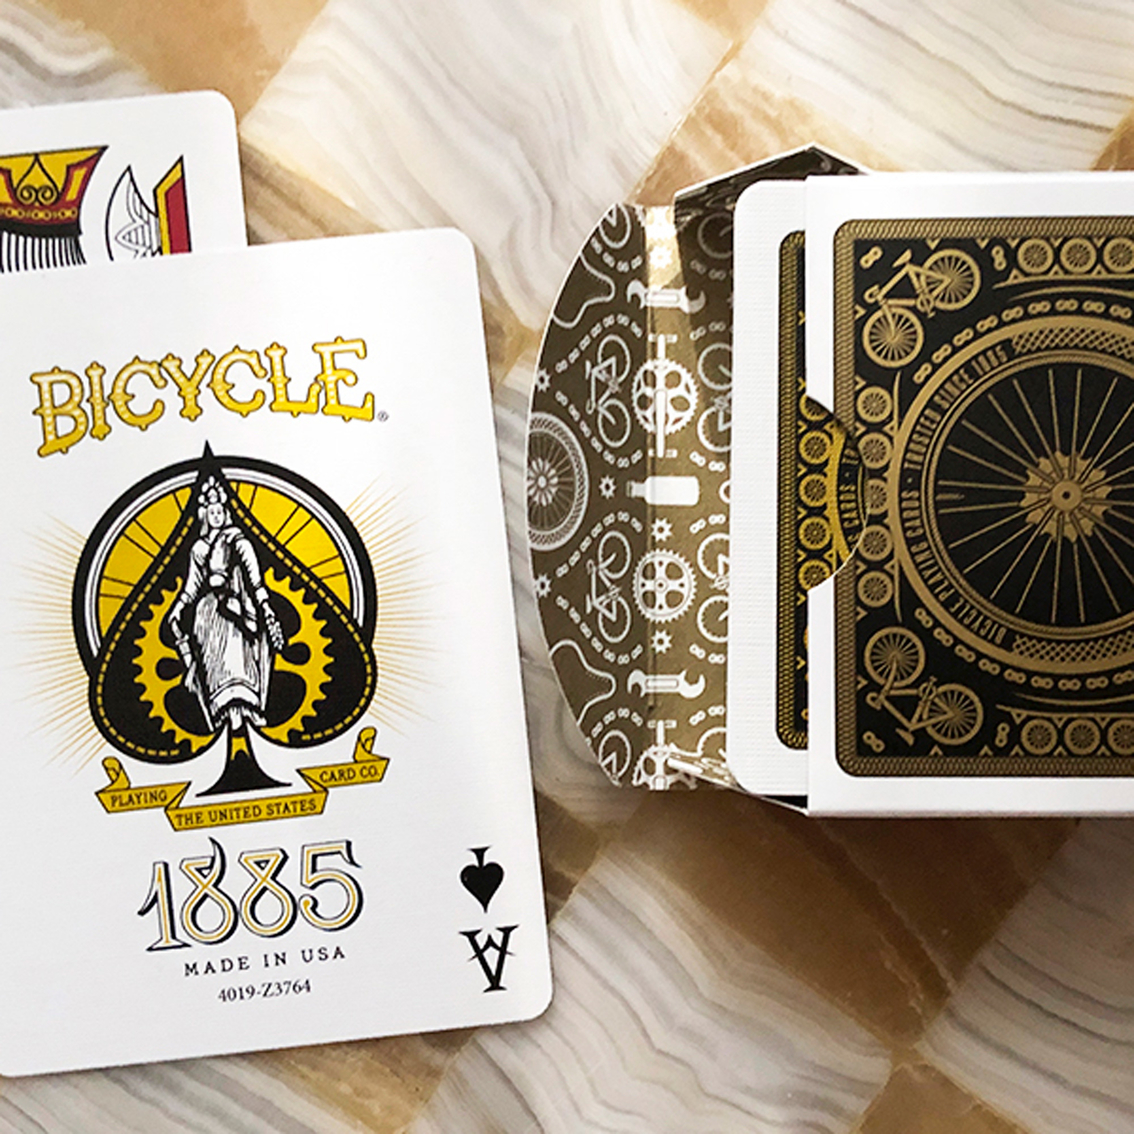 Bicycle 1885 Playing Cards - Image 5 of 6